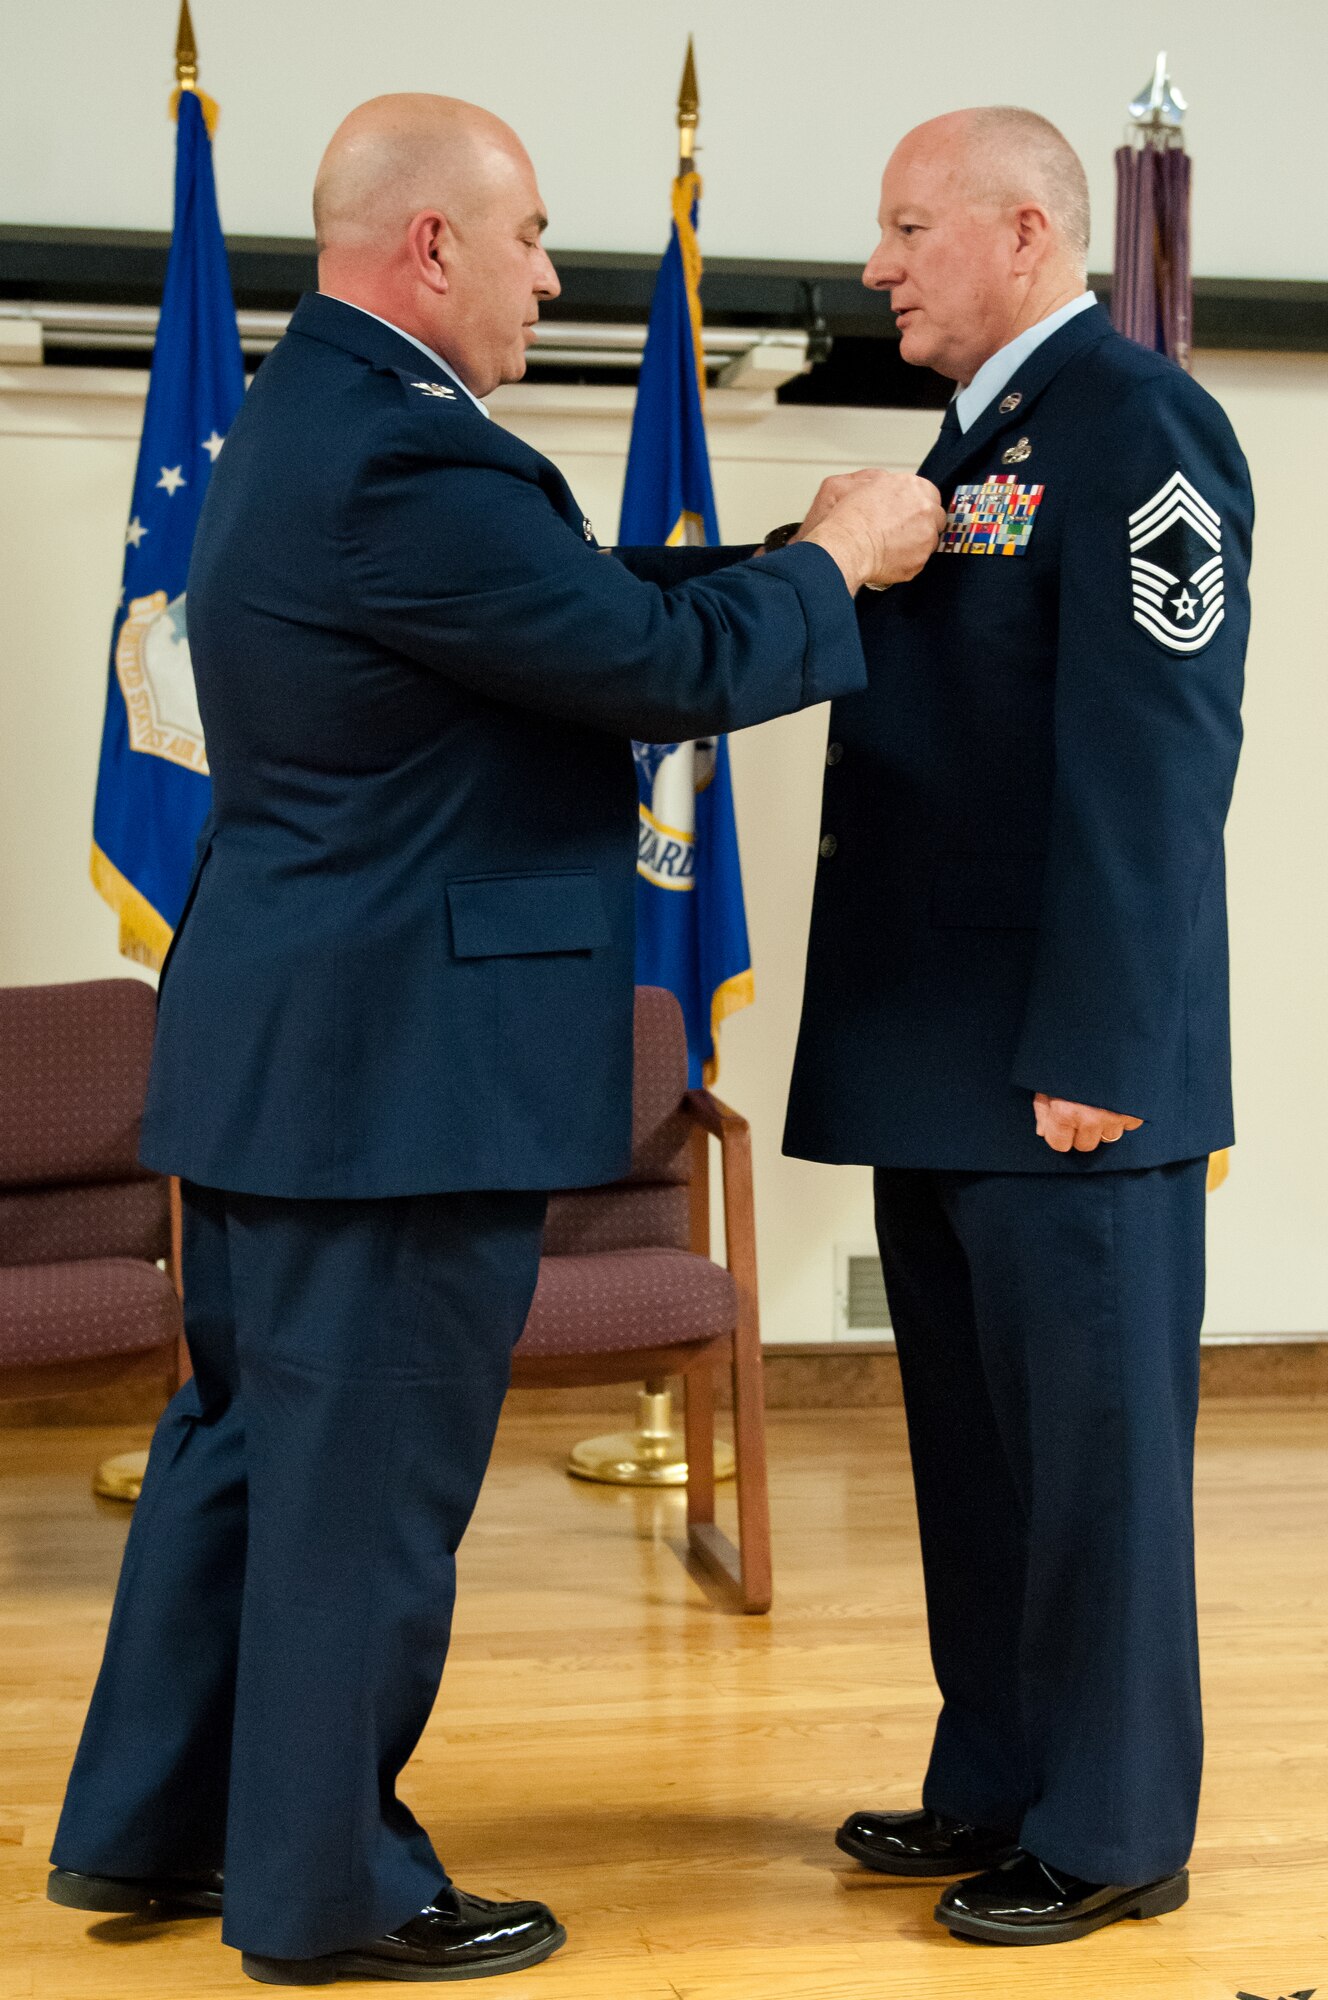 Col. Kenneth Dale (left), commander of the 123rd Maintenance Group, pins the Meritorious Service Medal to the jacket of Chief Master Sgt. Jim Amburgey during Amburgey's retirement ceremony at the Kentucky Air National Guard Base in Louisville, Ky., on Jan. 12, 2014. Amburgey served for more than 38 years. (U.S. Air National Guard photo by Staff Sgt. Vicky Spesard)